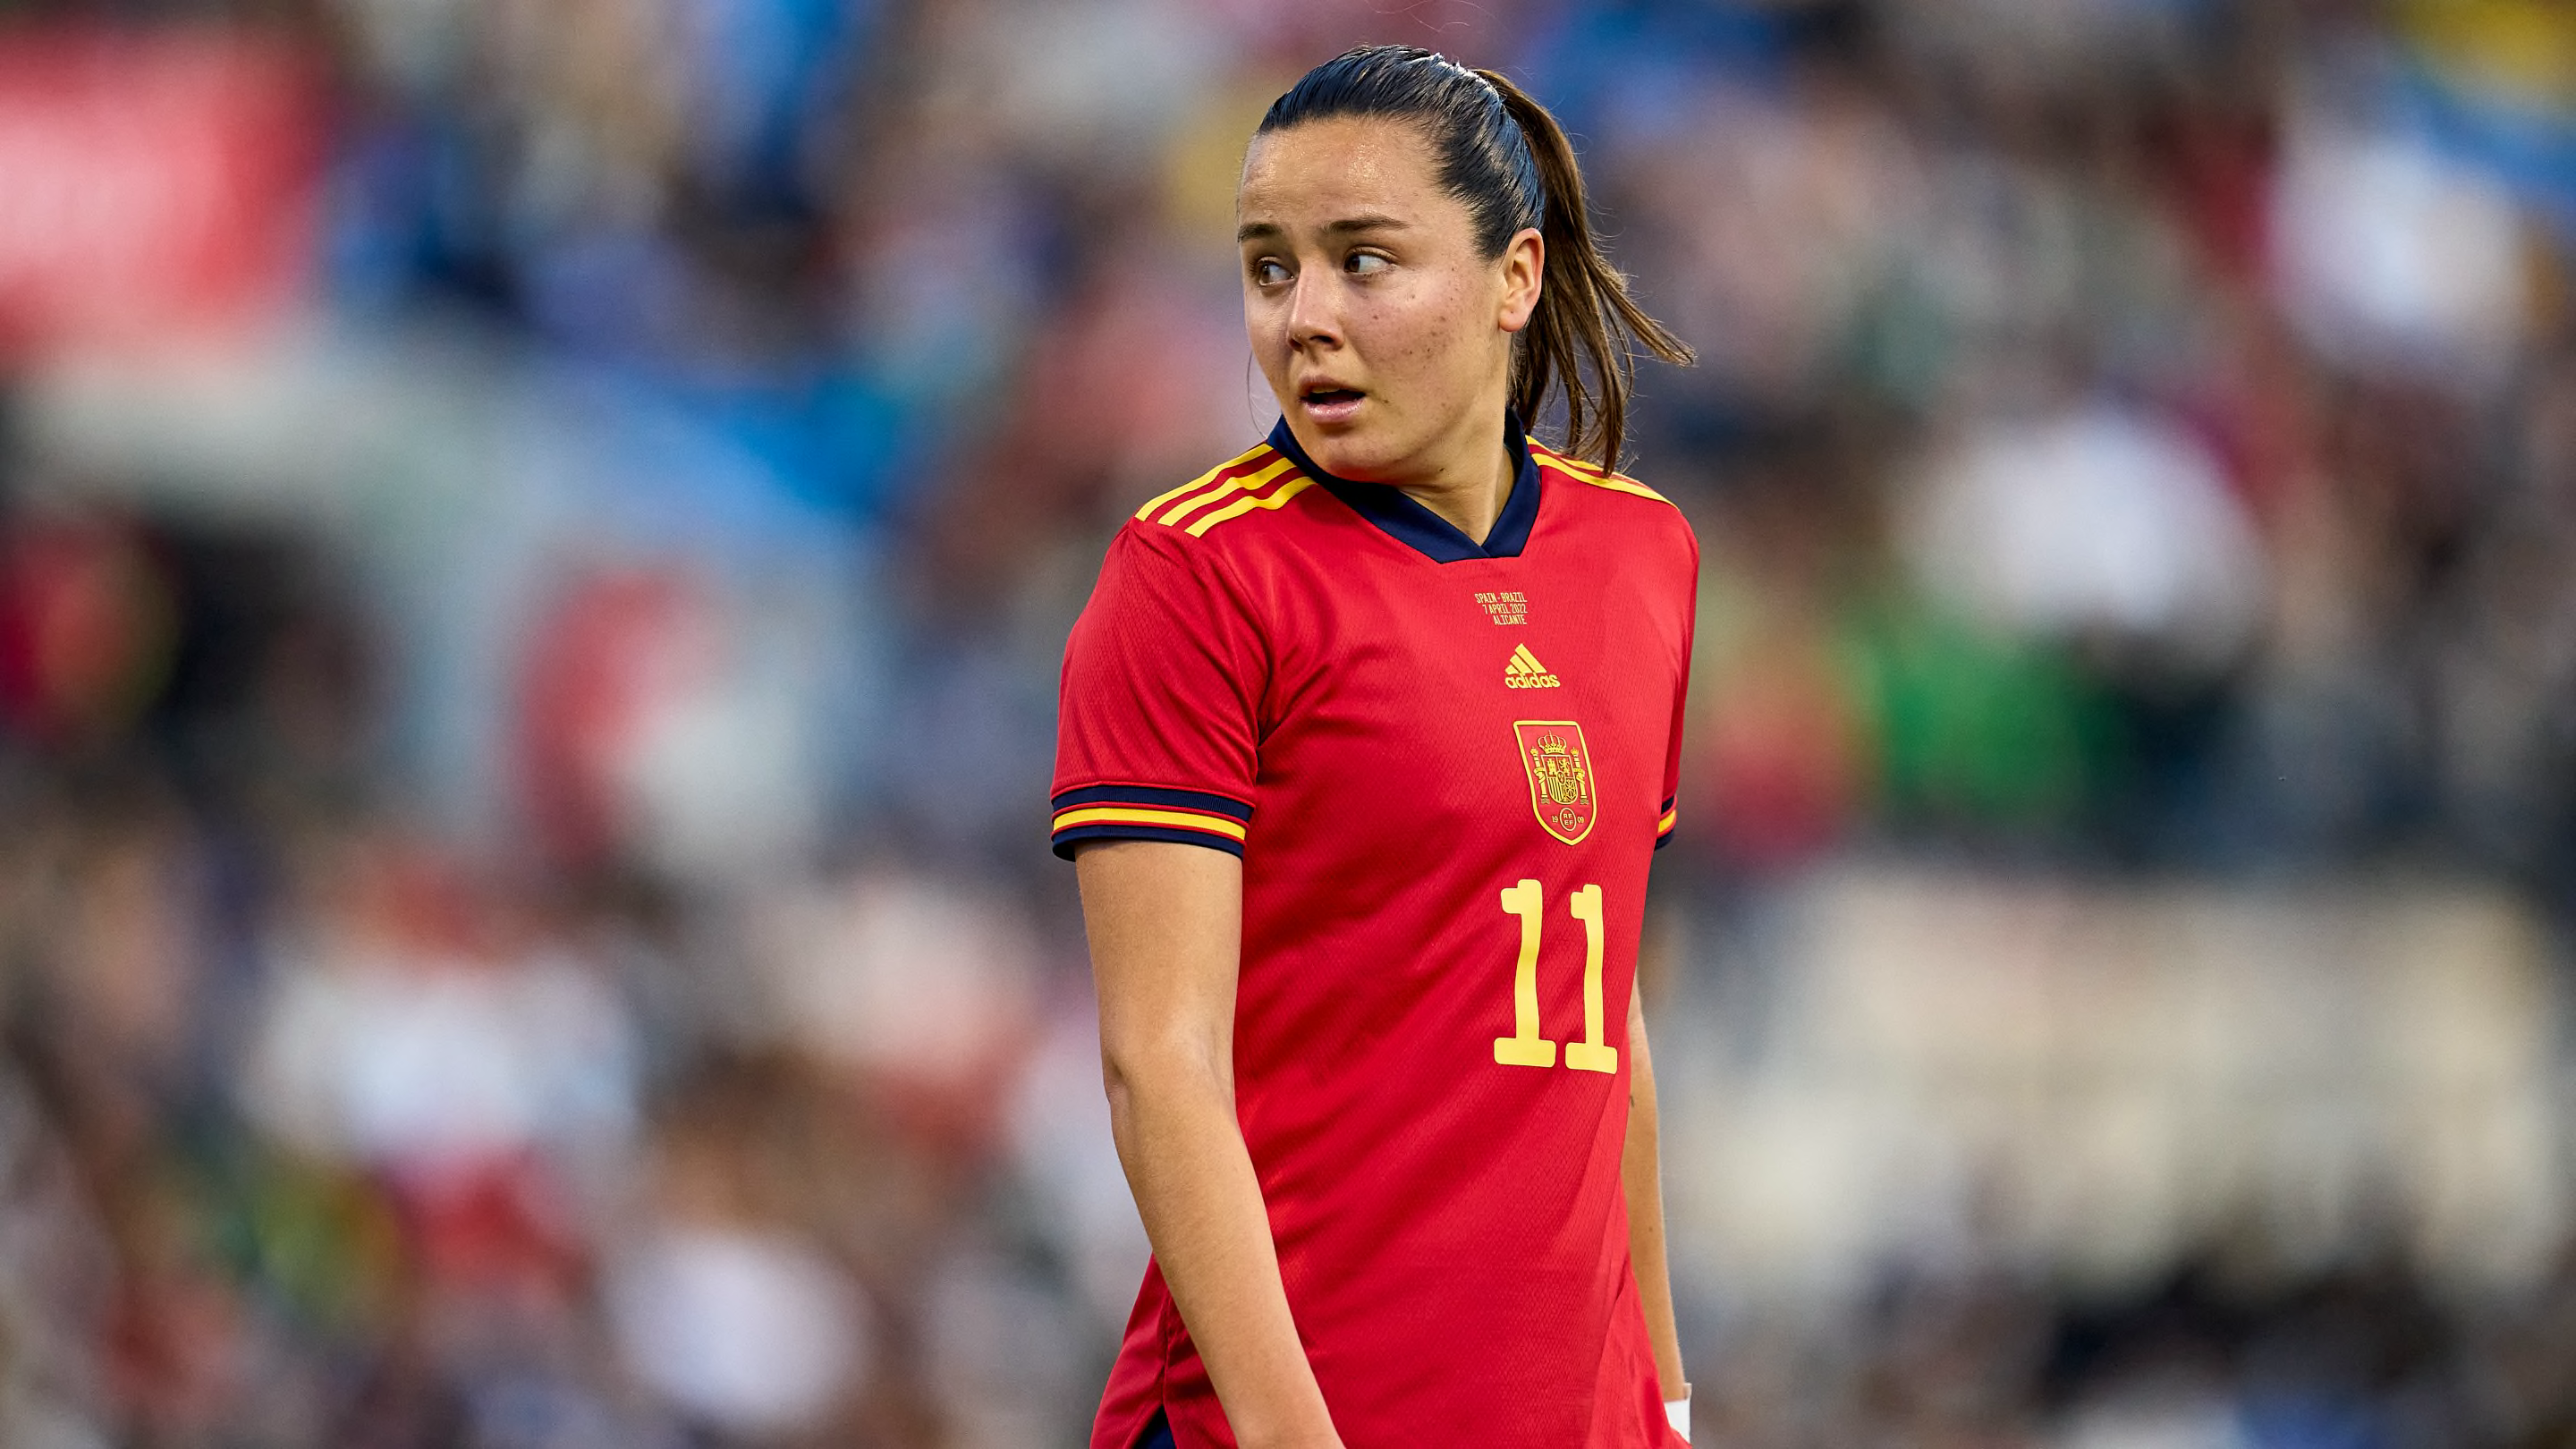 Women's Euro 2022: Spain cut provisional squad to final 23